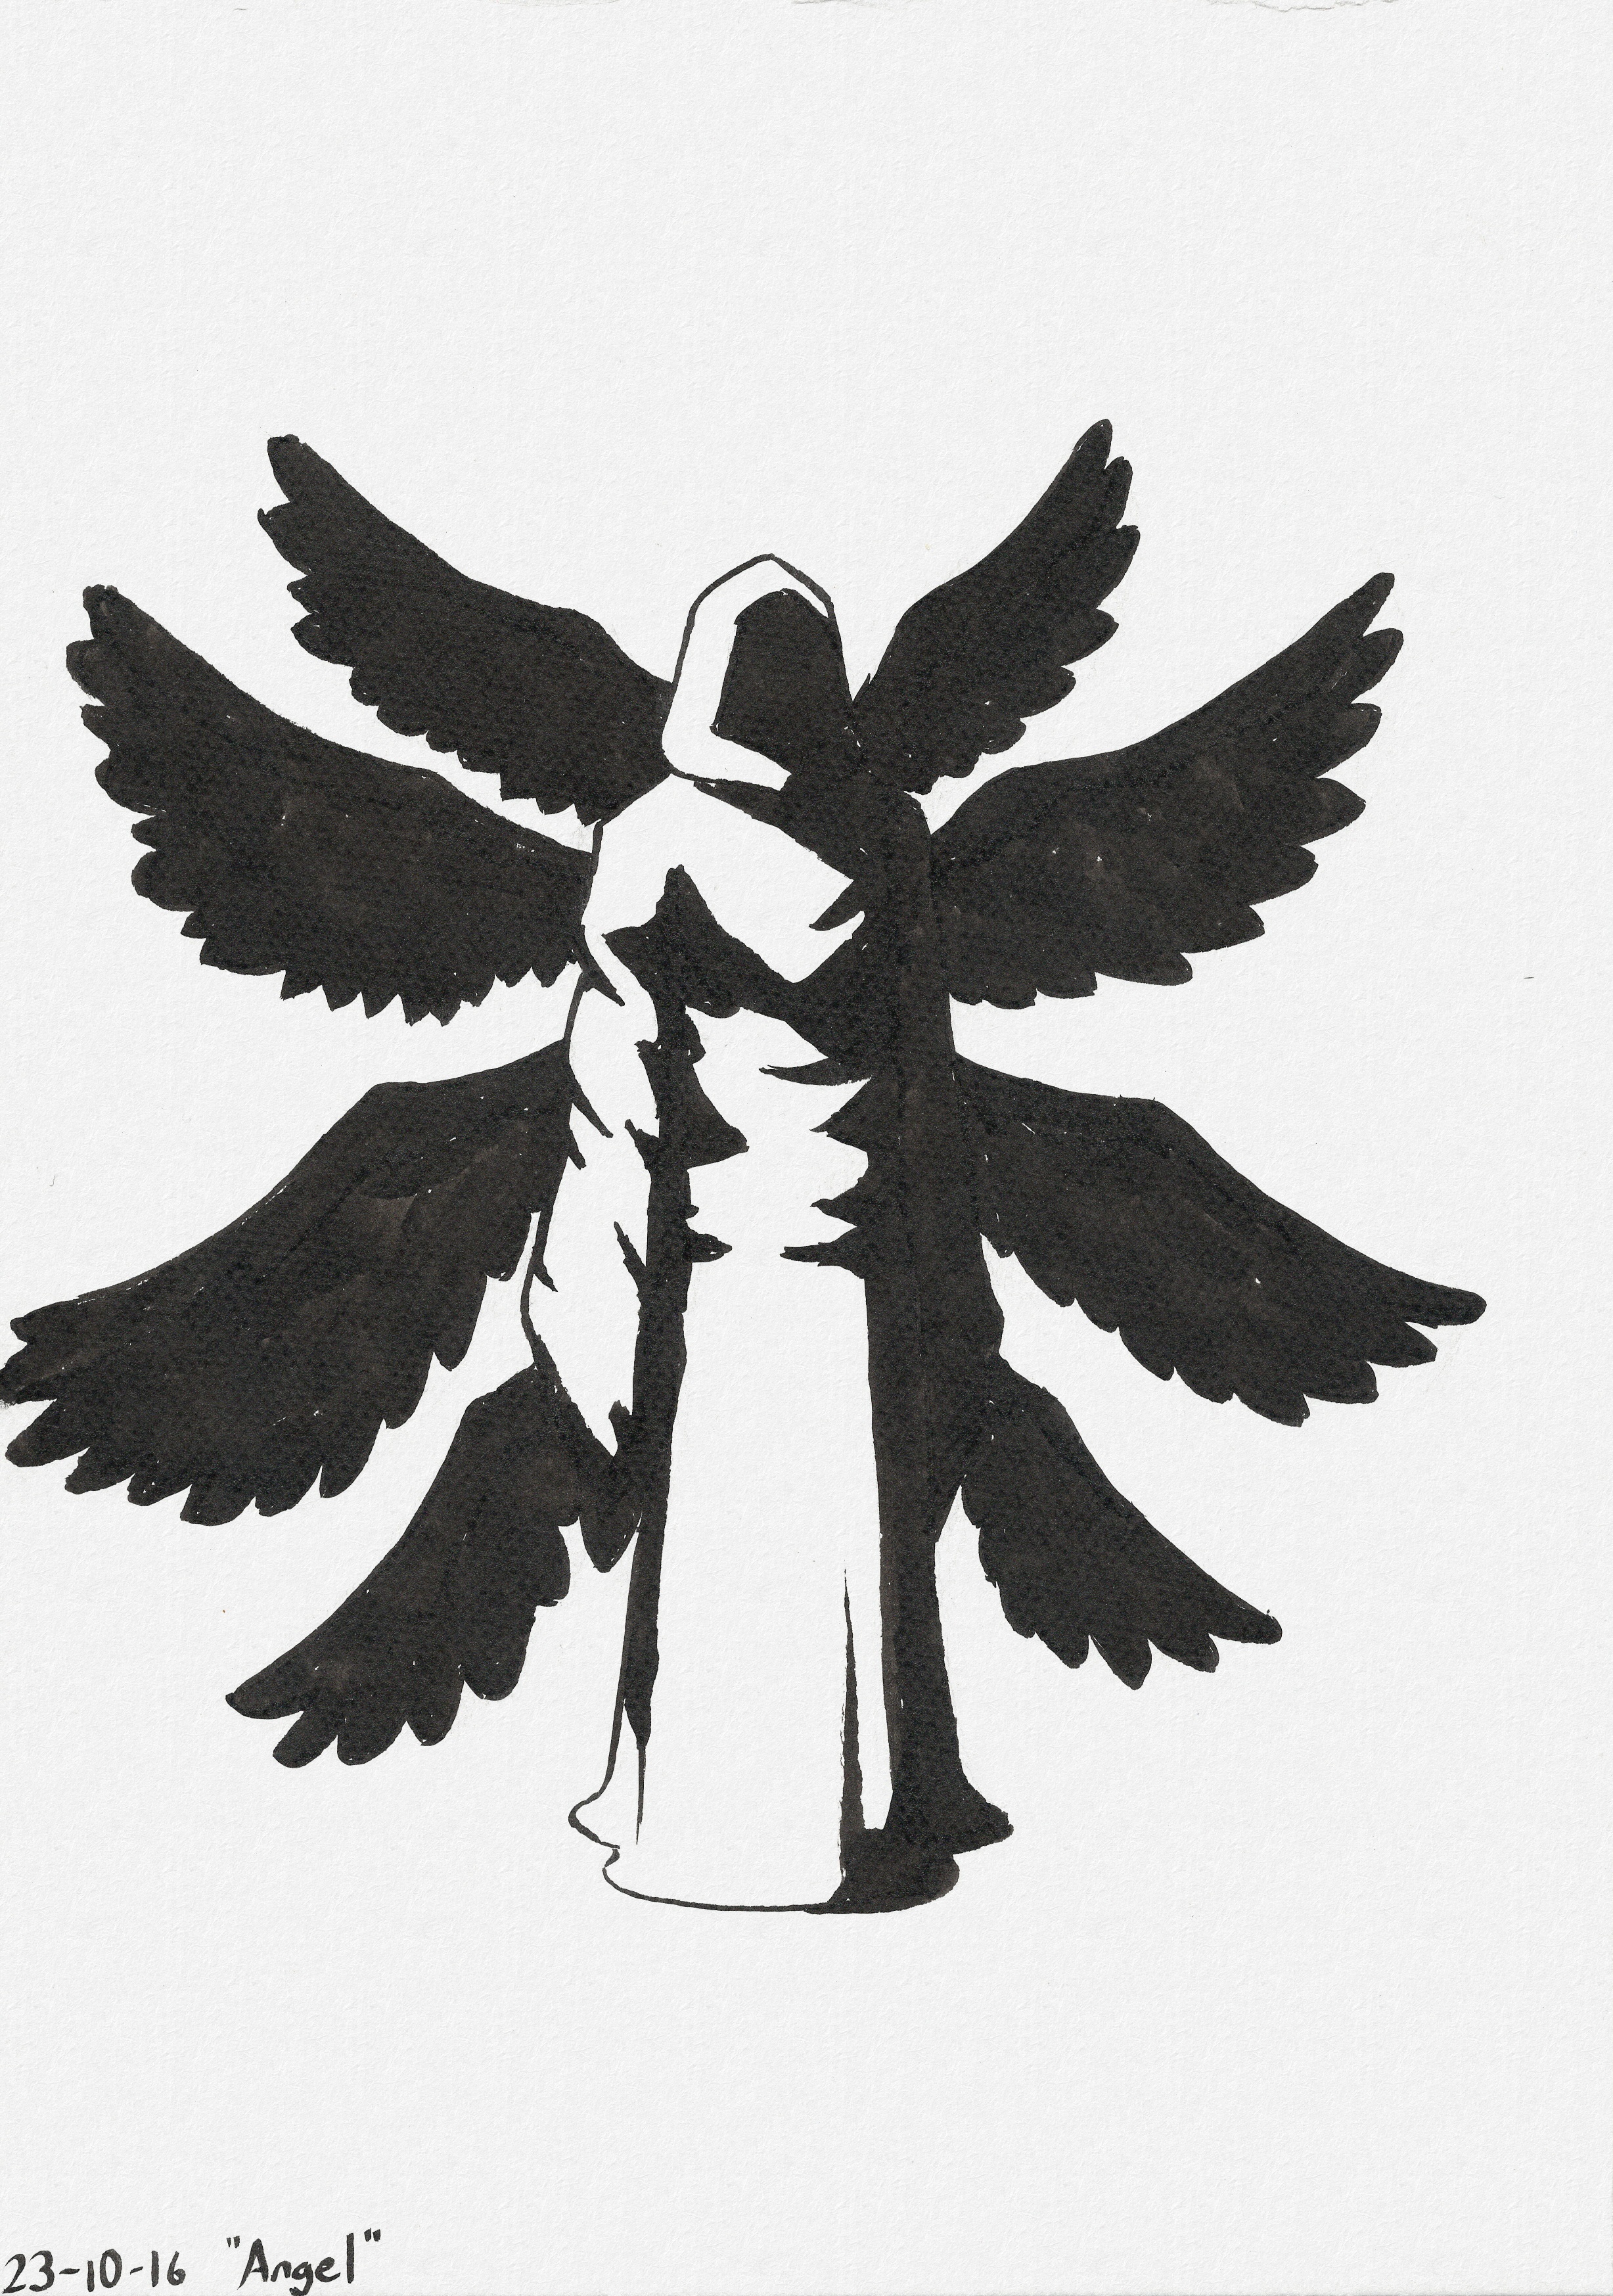 A figure wearing a long hooded robe. Their face is hidden in shadow and four pairs of wings are spread out behind them.